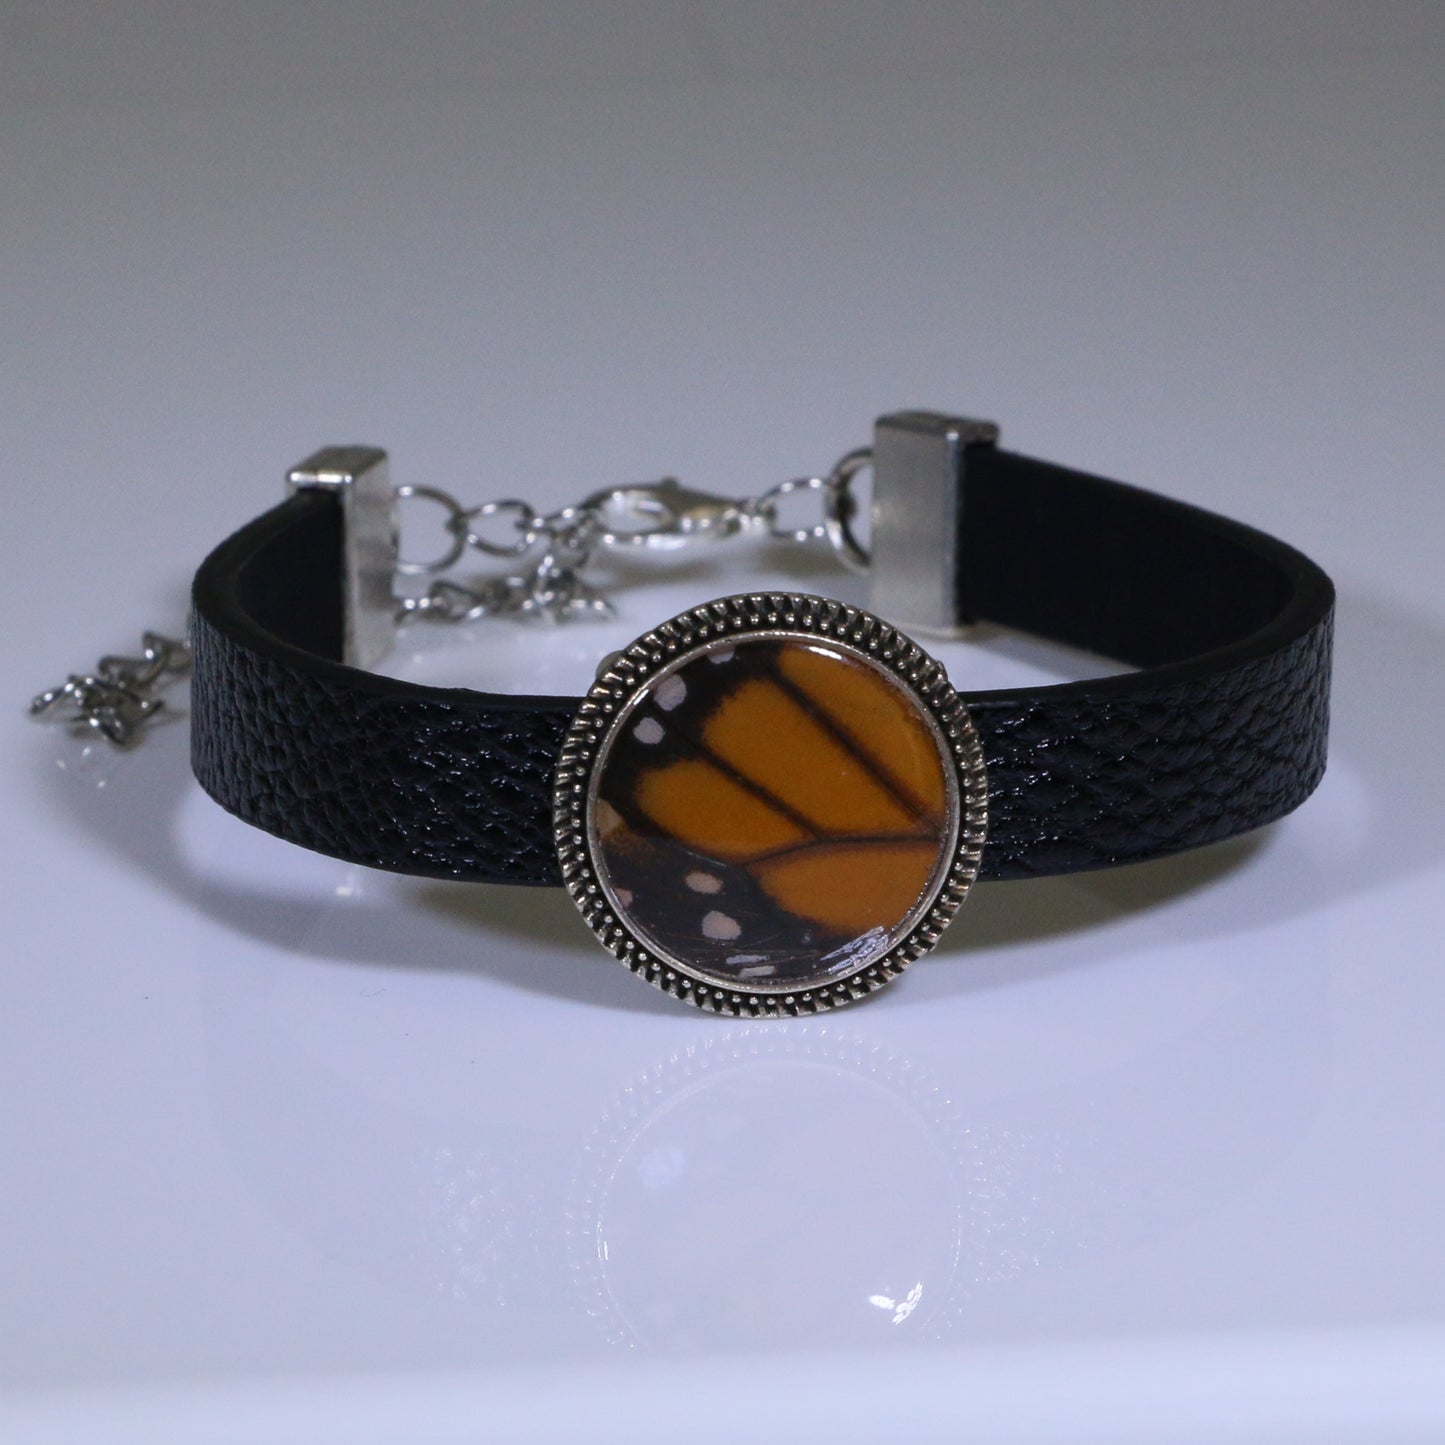 53004 - Real Butterfly Wing Jewelry - Bracelet Collection - Monarch Butterfly